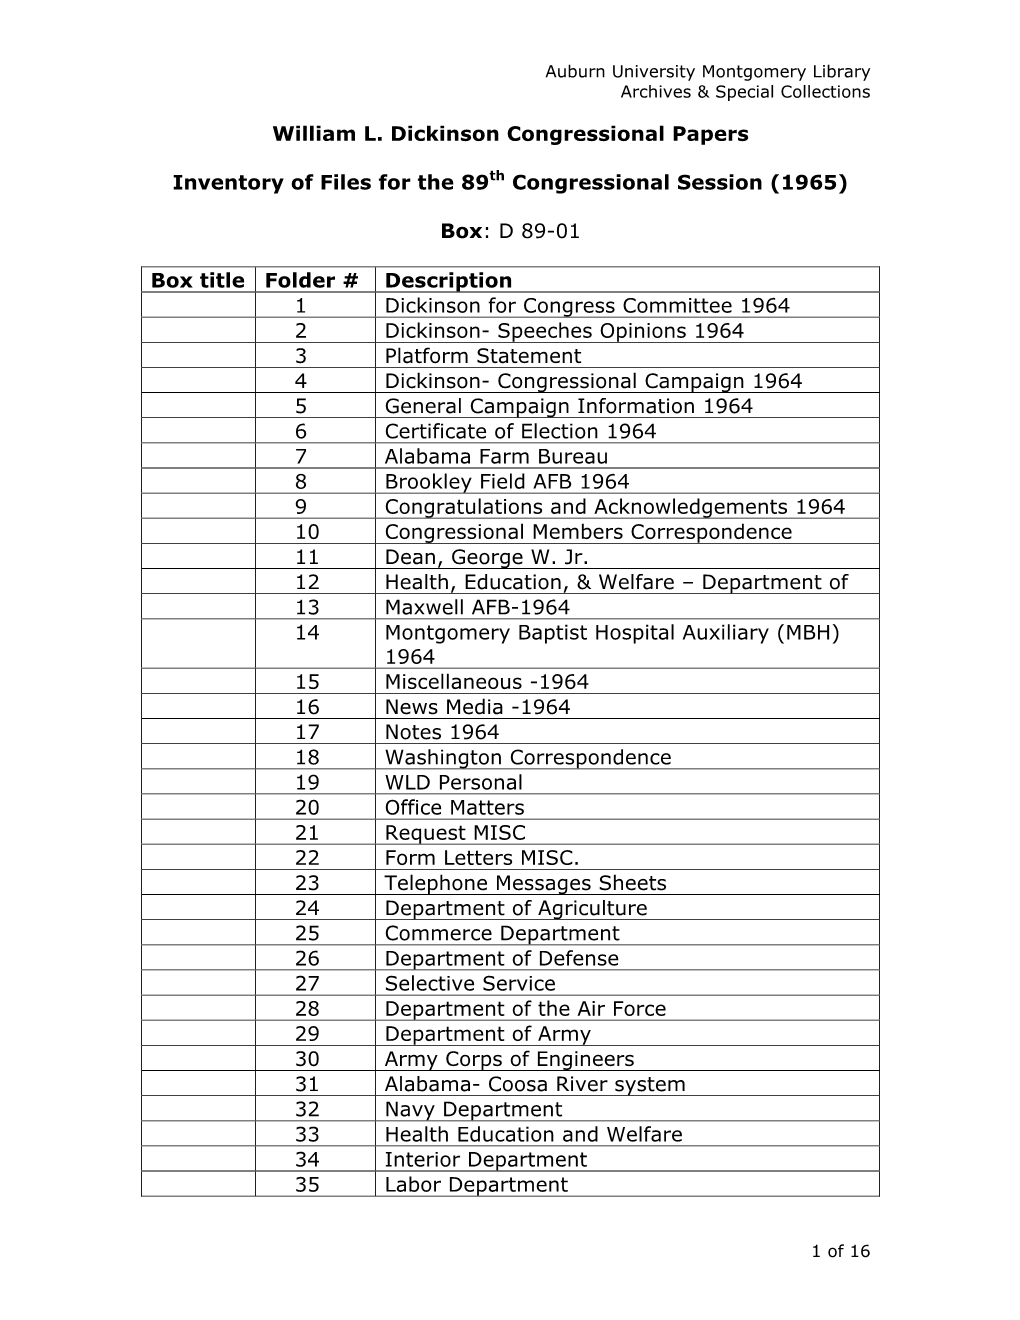 89Th Congressional Session Inventory (1965-66)